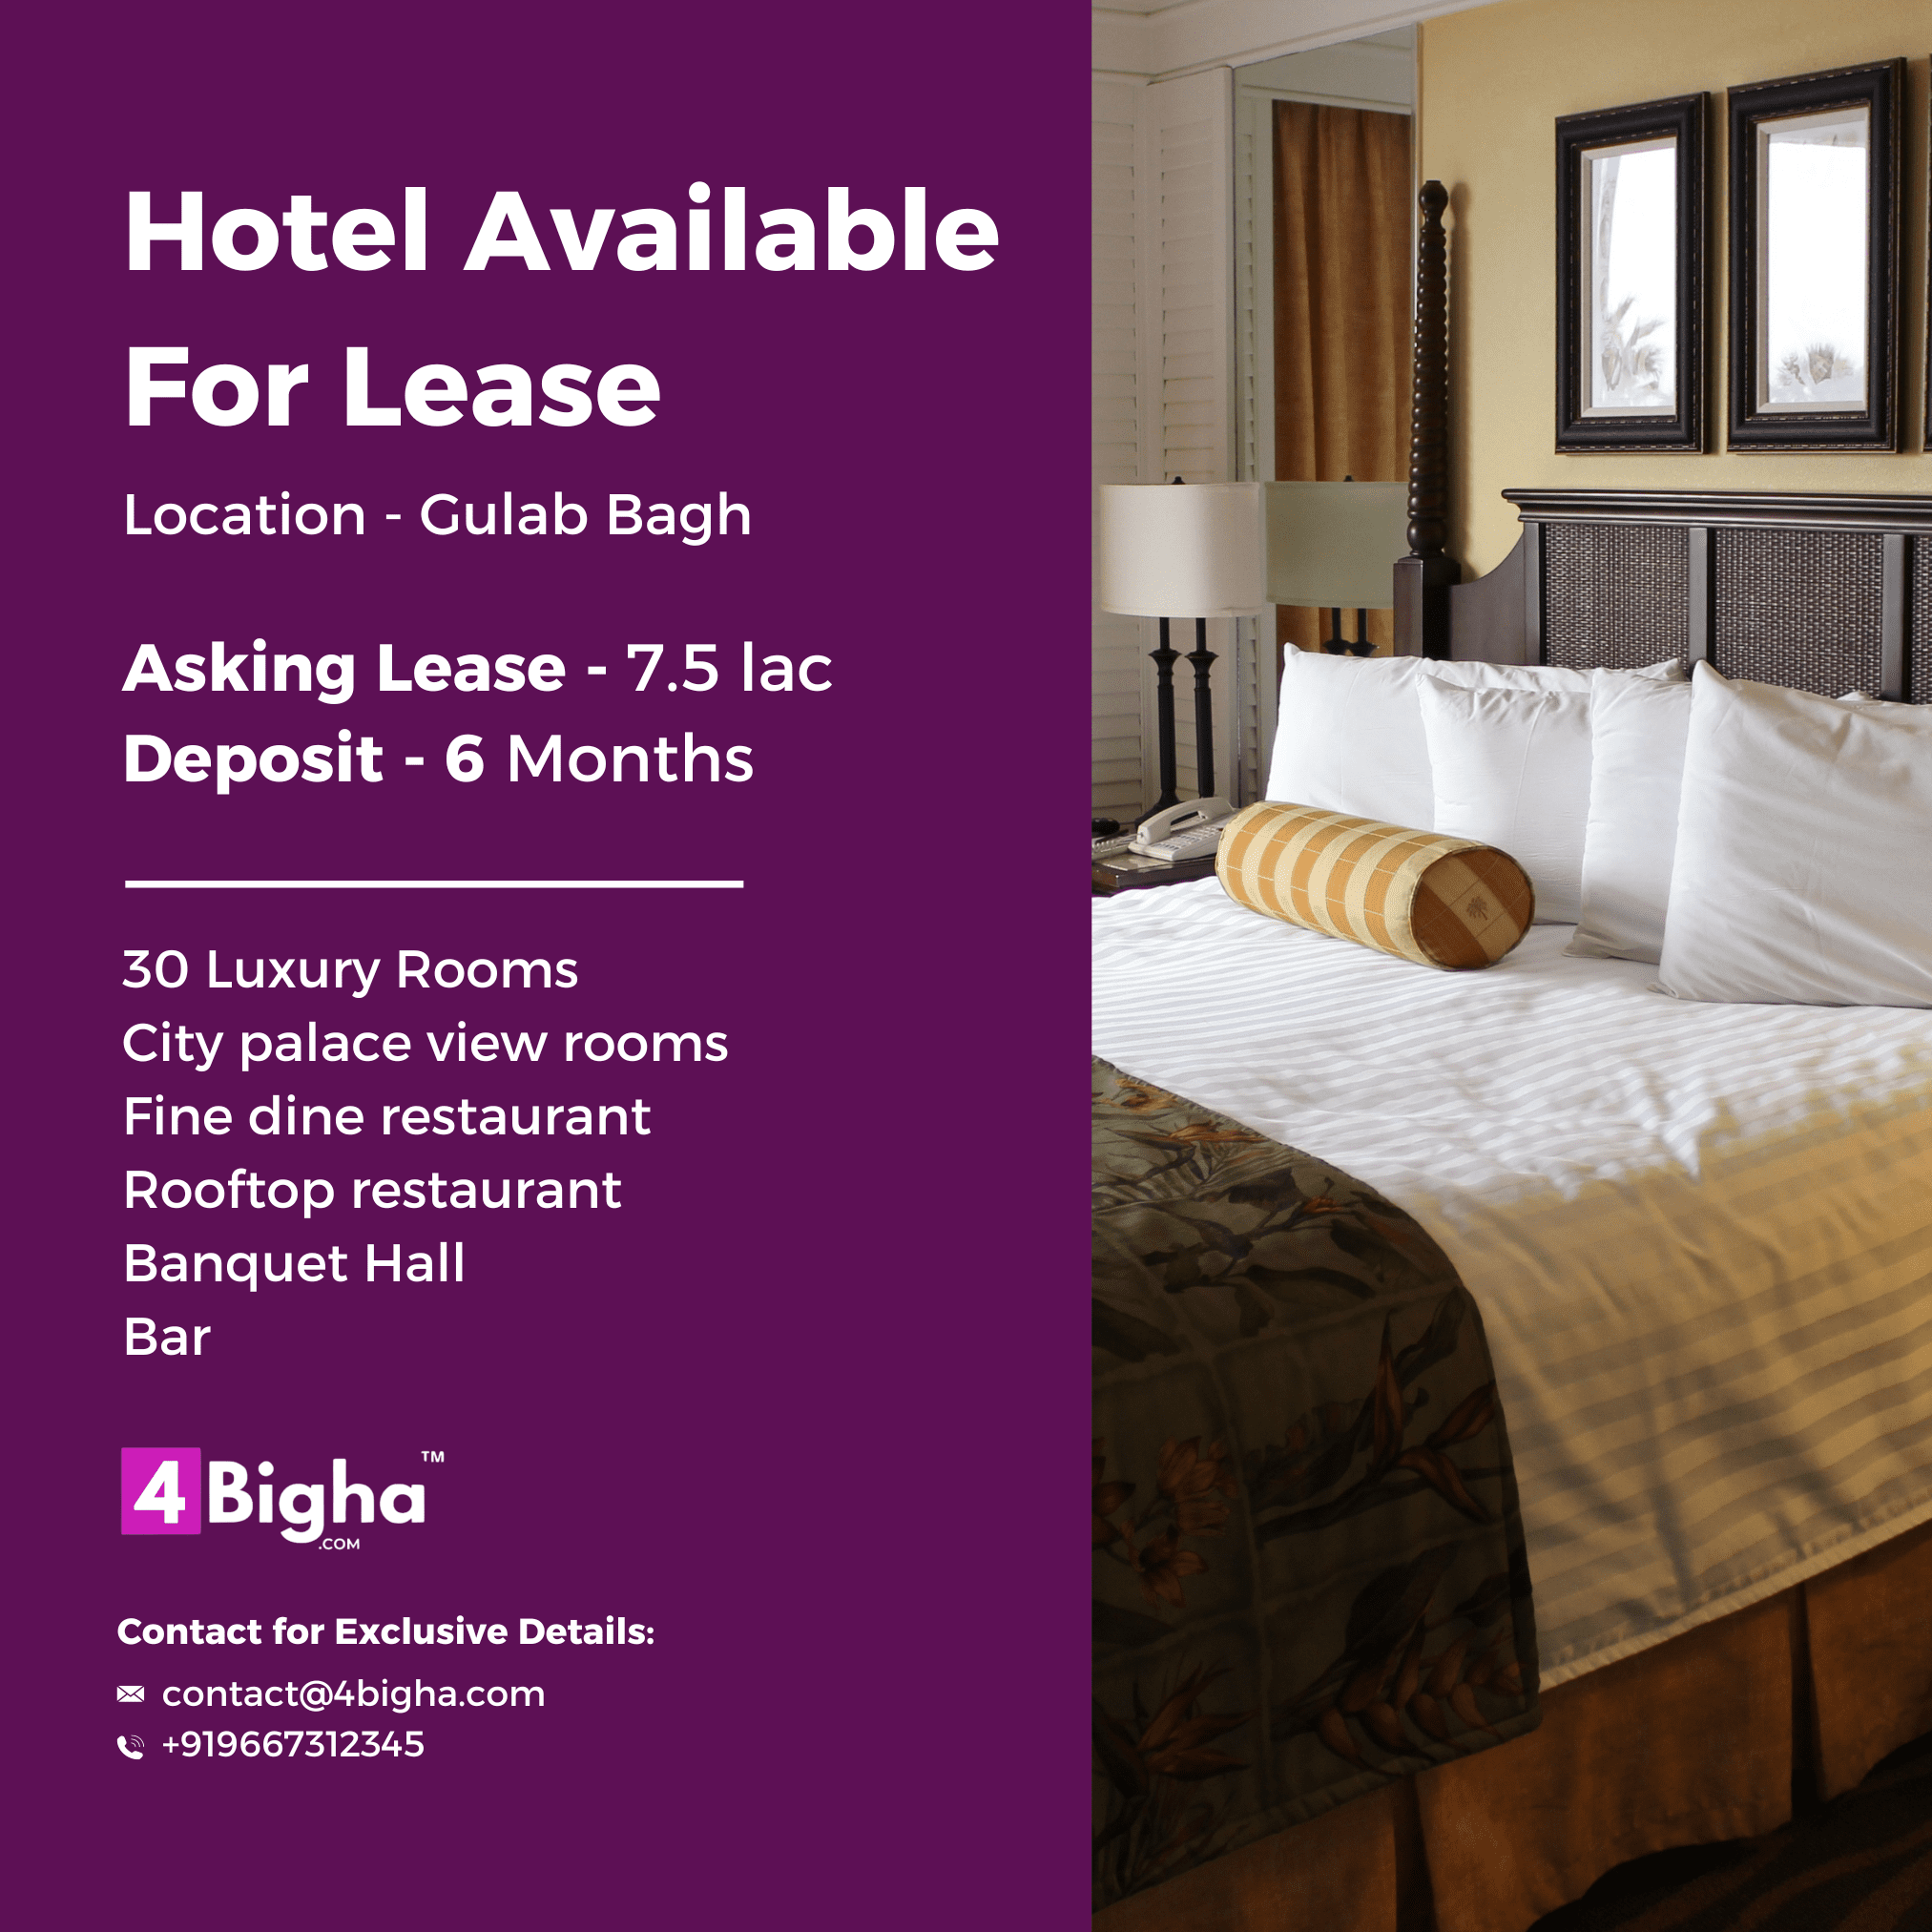 Hotel Available For Lease, Location - Gulab Bagh​